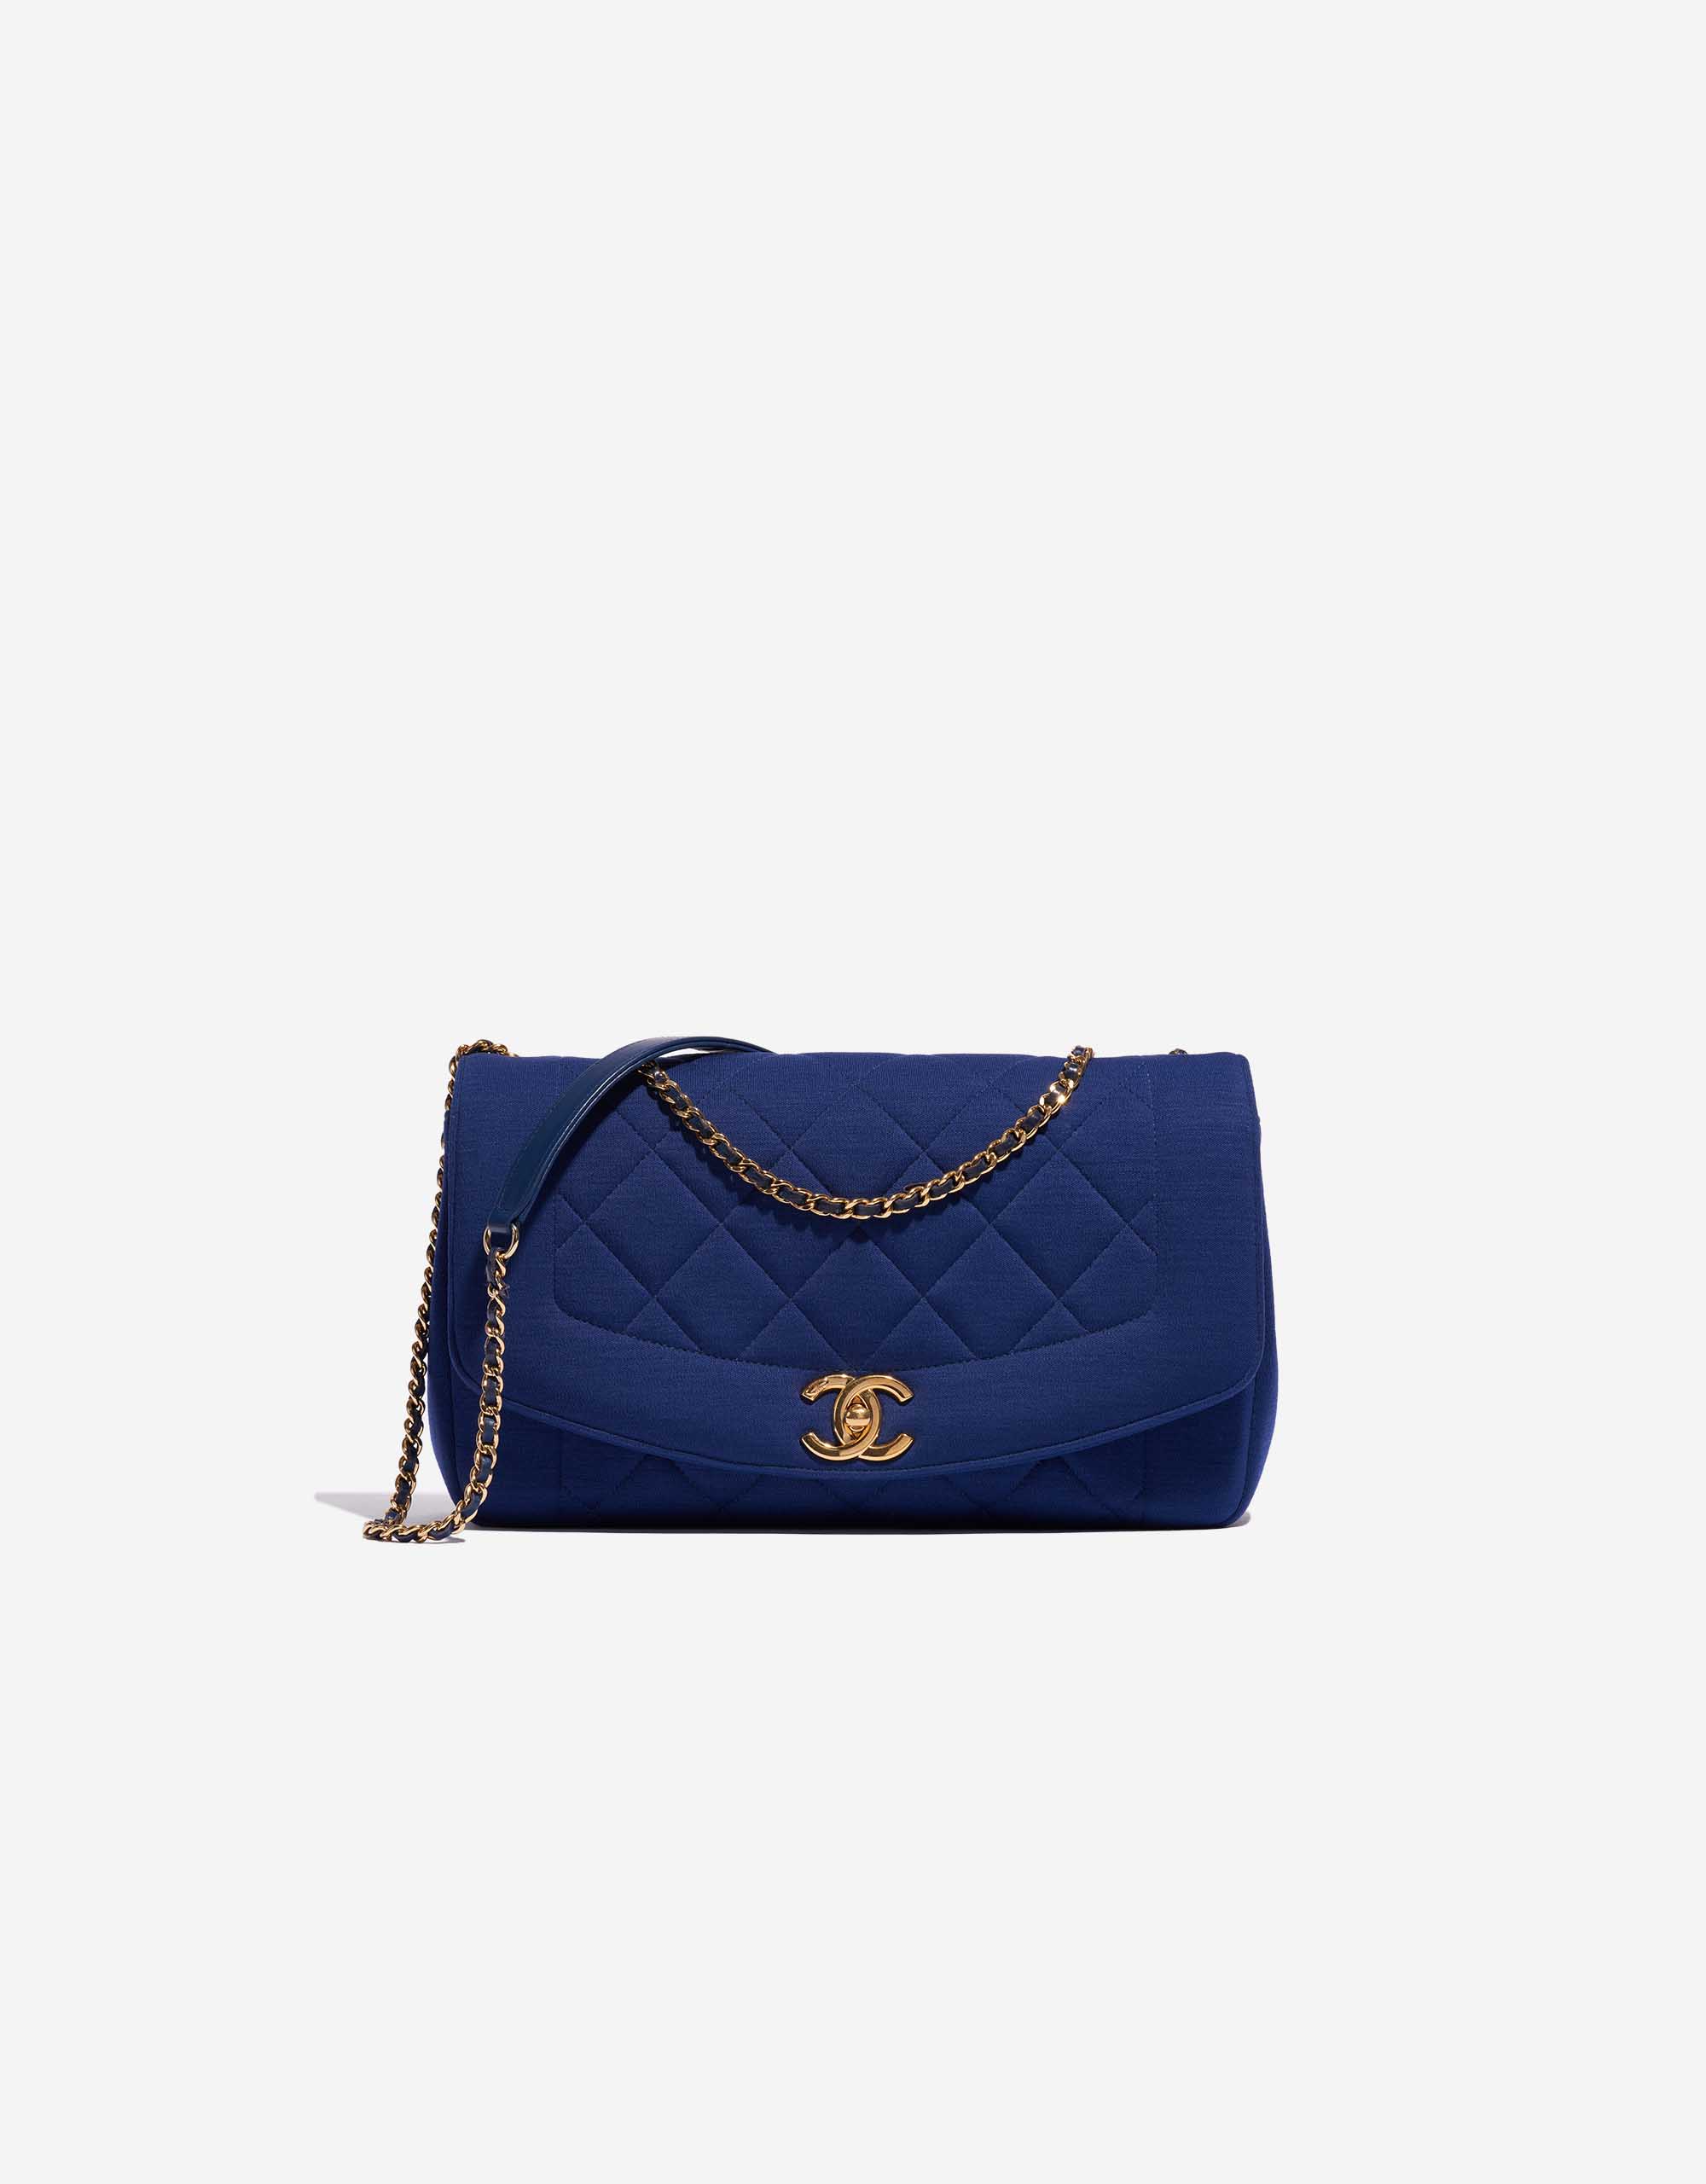 Chanel Blue Quilted Jersey Diana Flap Bag Gold Hardware, 2015 (Very Good)